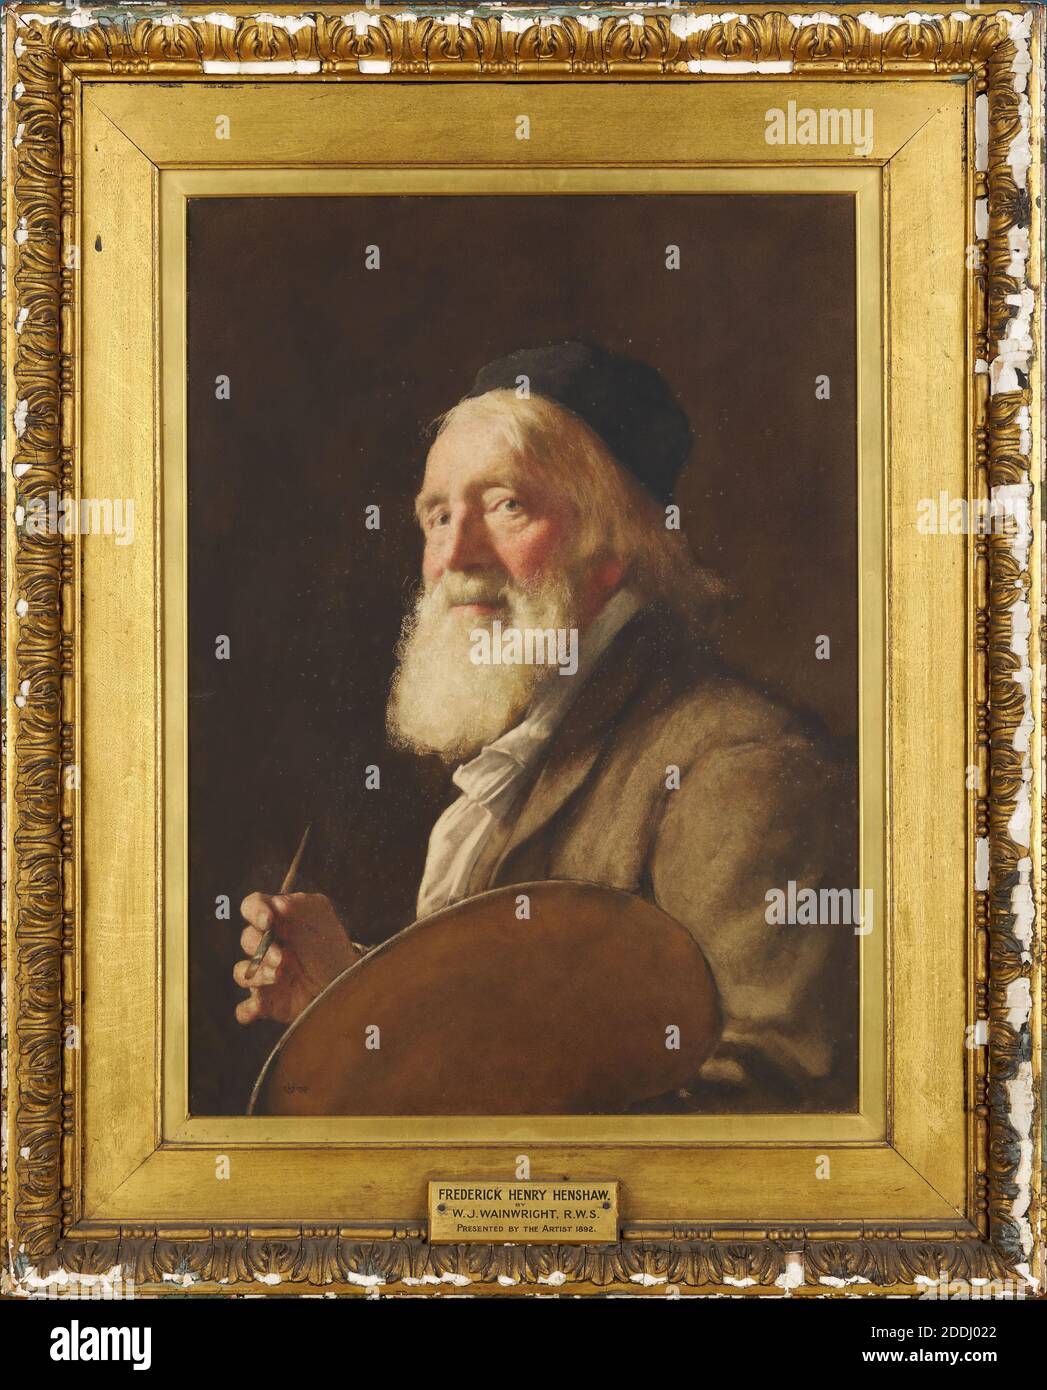 Portrait Of Frederick Henry Henshaw (1807-91),1891 William John Wainwright (d.1931), 19th Century, Watercolour, Painting, Portrait, Frame, Male, Works on Paper Stock Photo